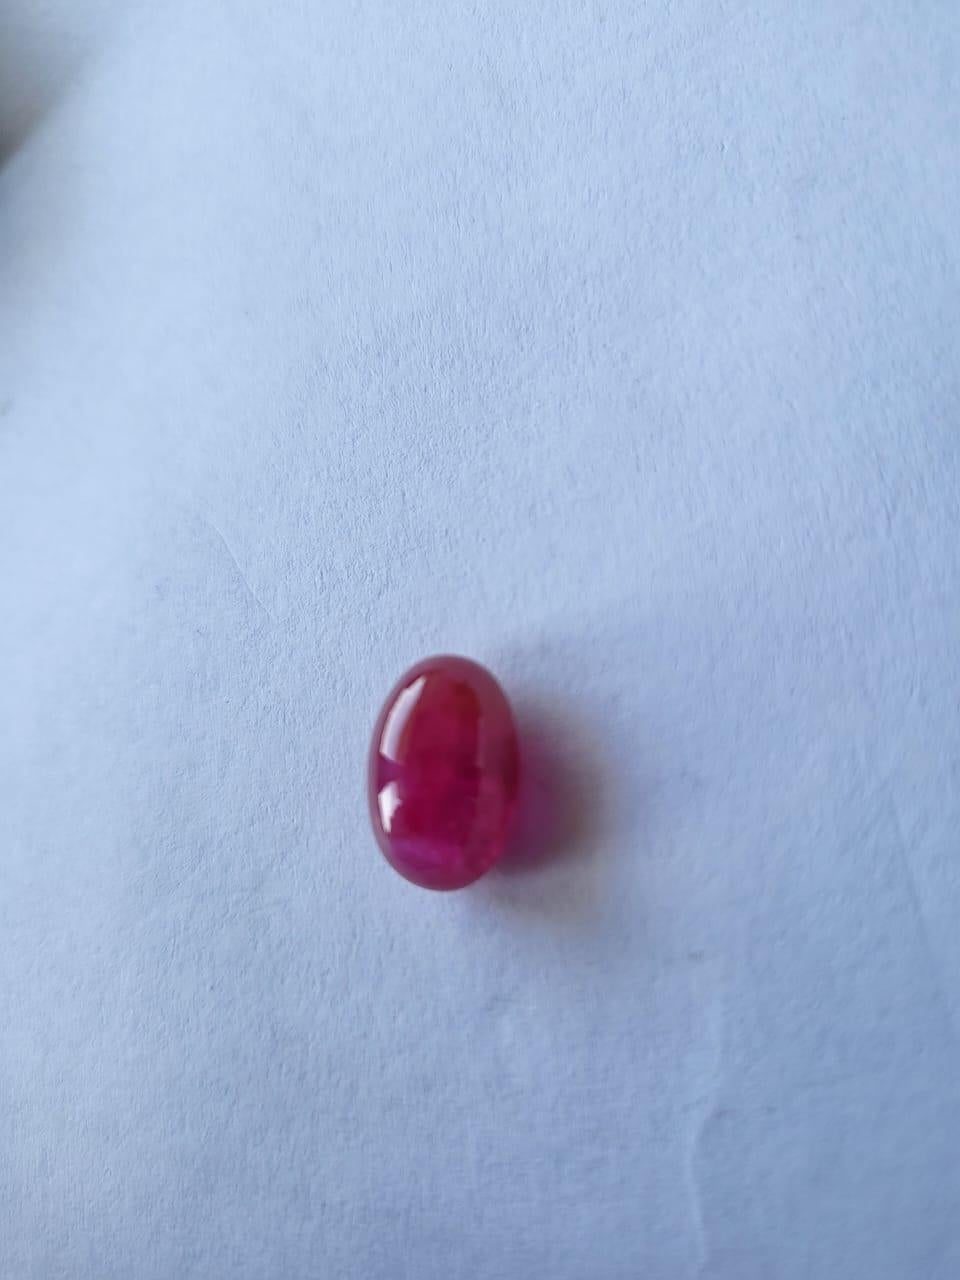 Natural Beautiful Ruby Oval Cabochon Gemstone.
6.57 Carat with a elegant Red color and excellent clarity. Burma Origin( No Heat) Also has an excellent fancy Oval shape with ideal polish to show great shine and color . It will look authentic in